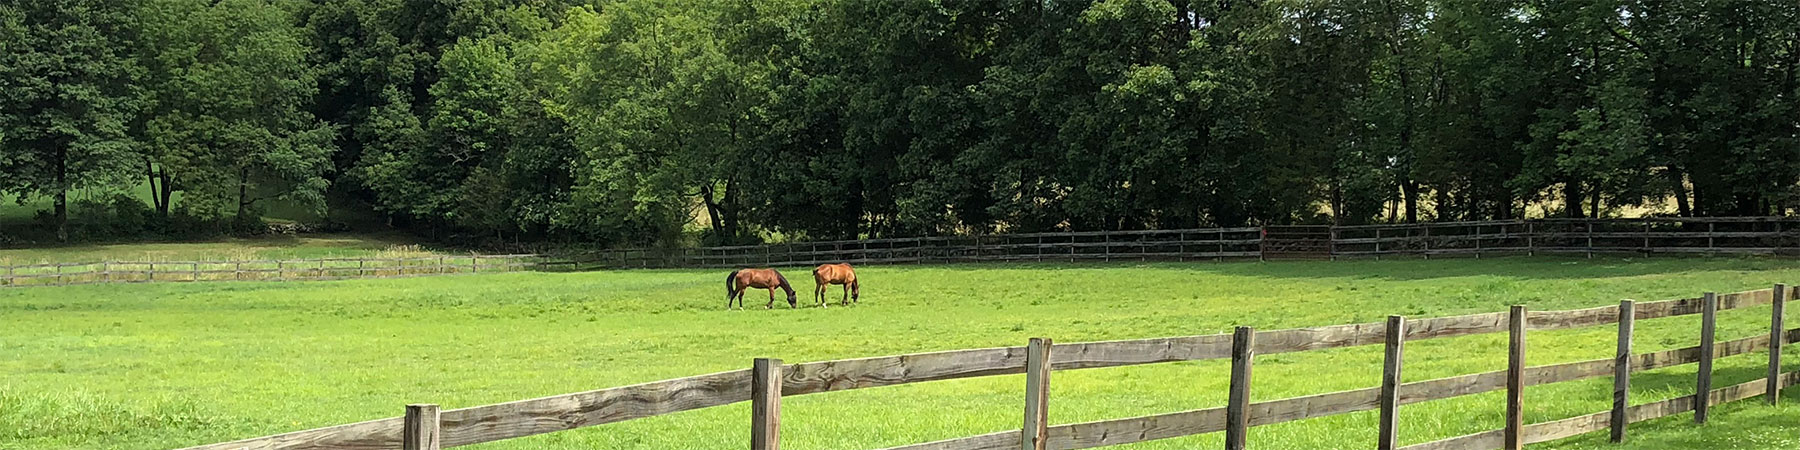 picture of horses in a fenced field in Lafayette.